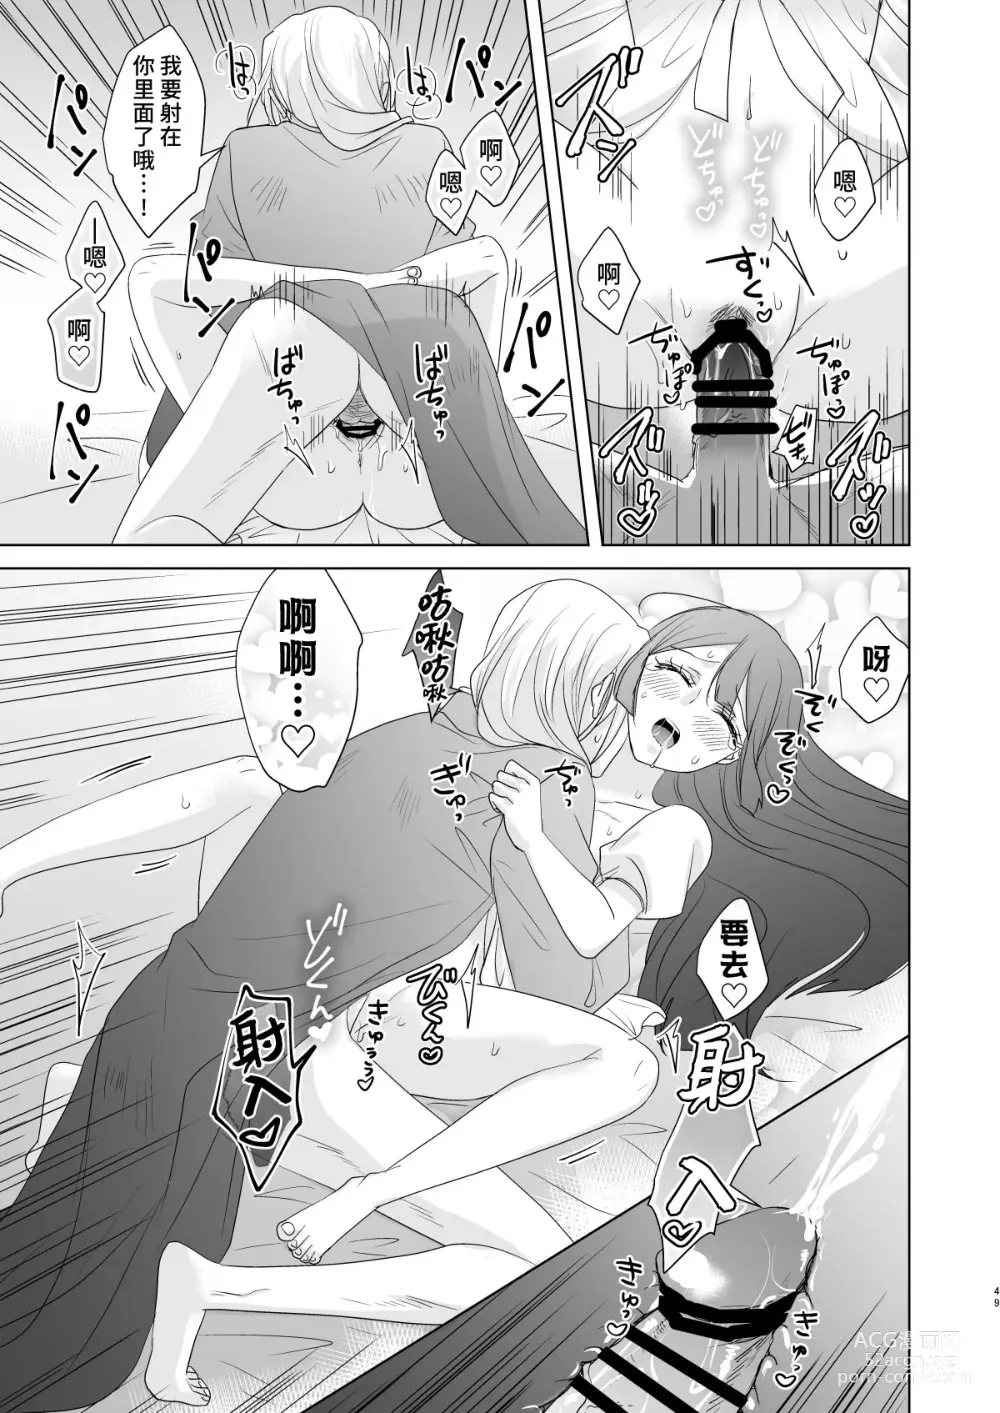 Page 48 of doujinshi 男大姐♂吸血鬼和少女